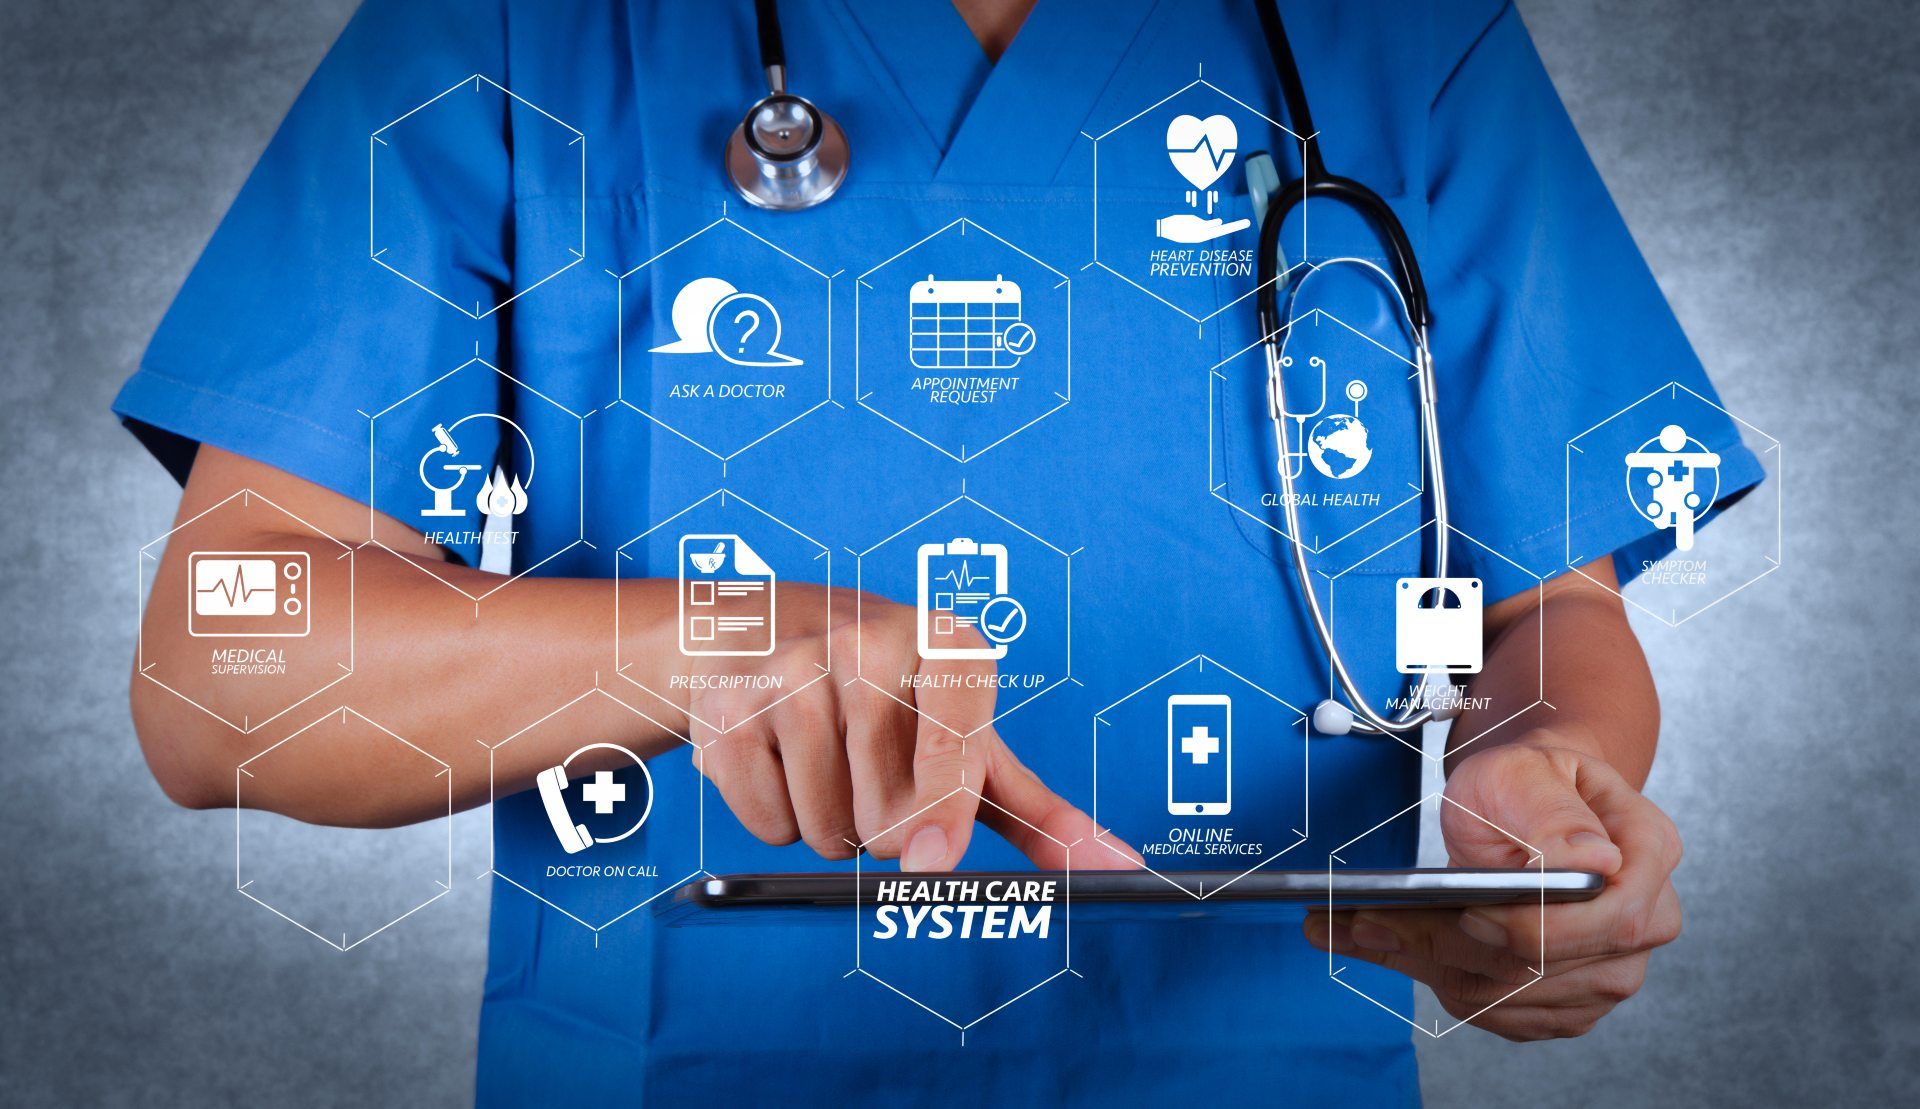 Graphic shows health care system element icons in front of man in scrubs and stethoscope using a tablet - sutter health